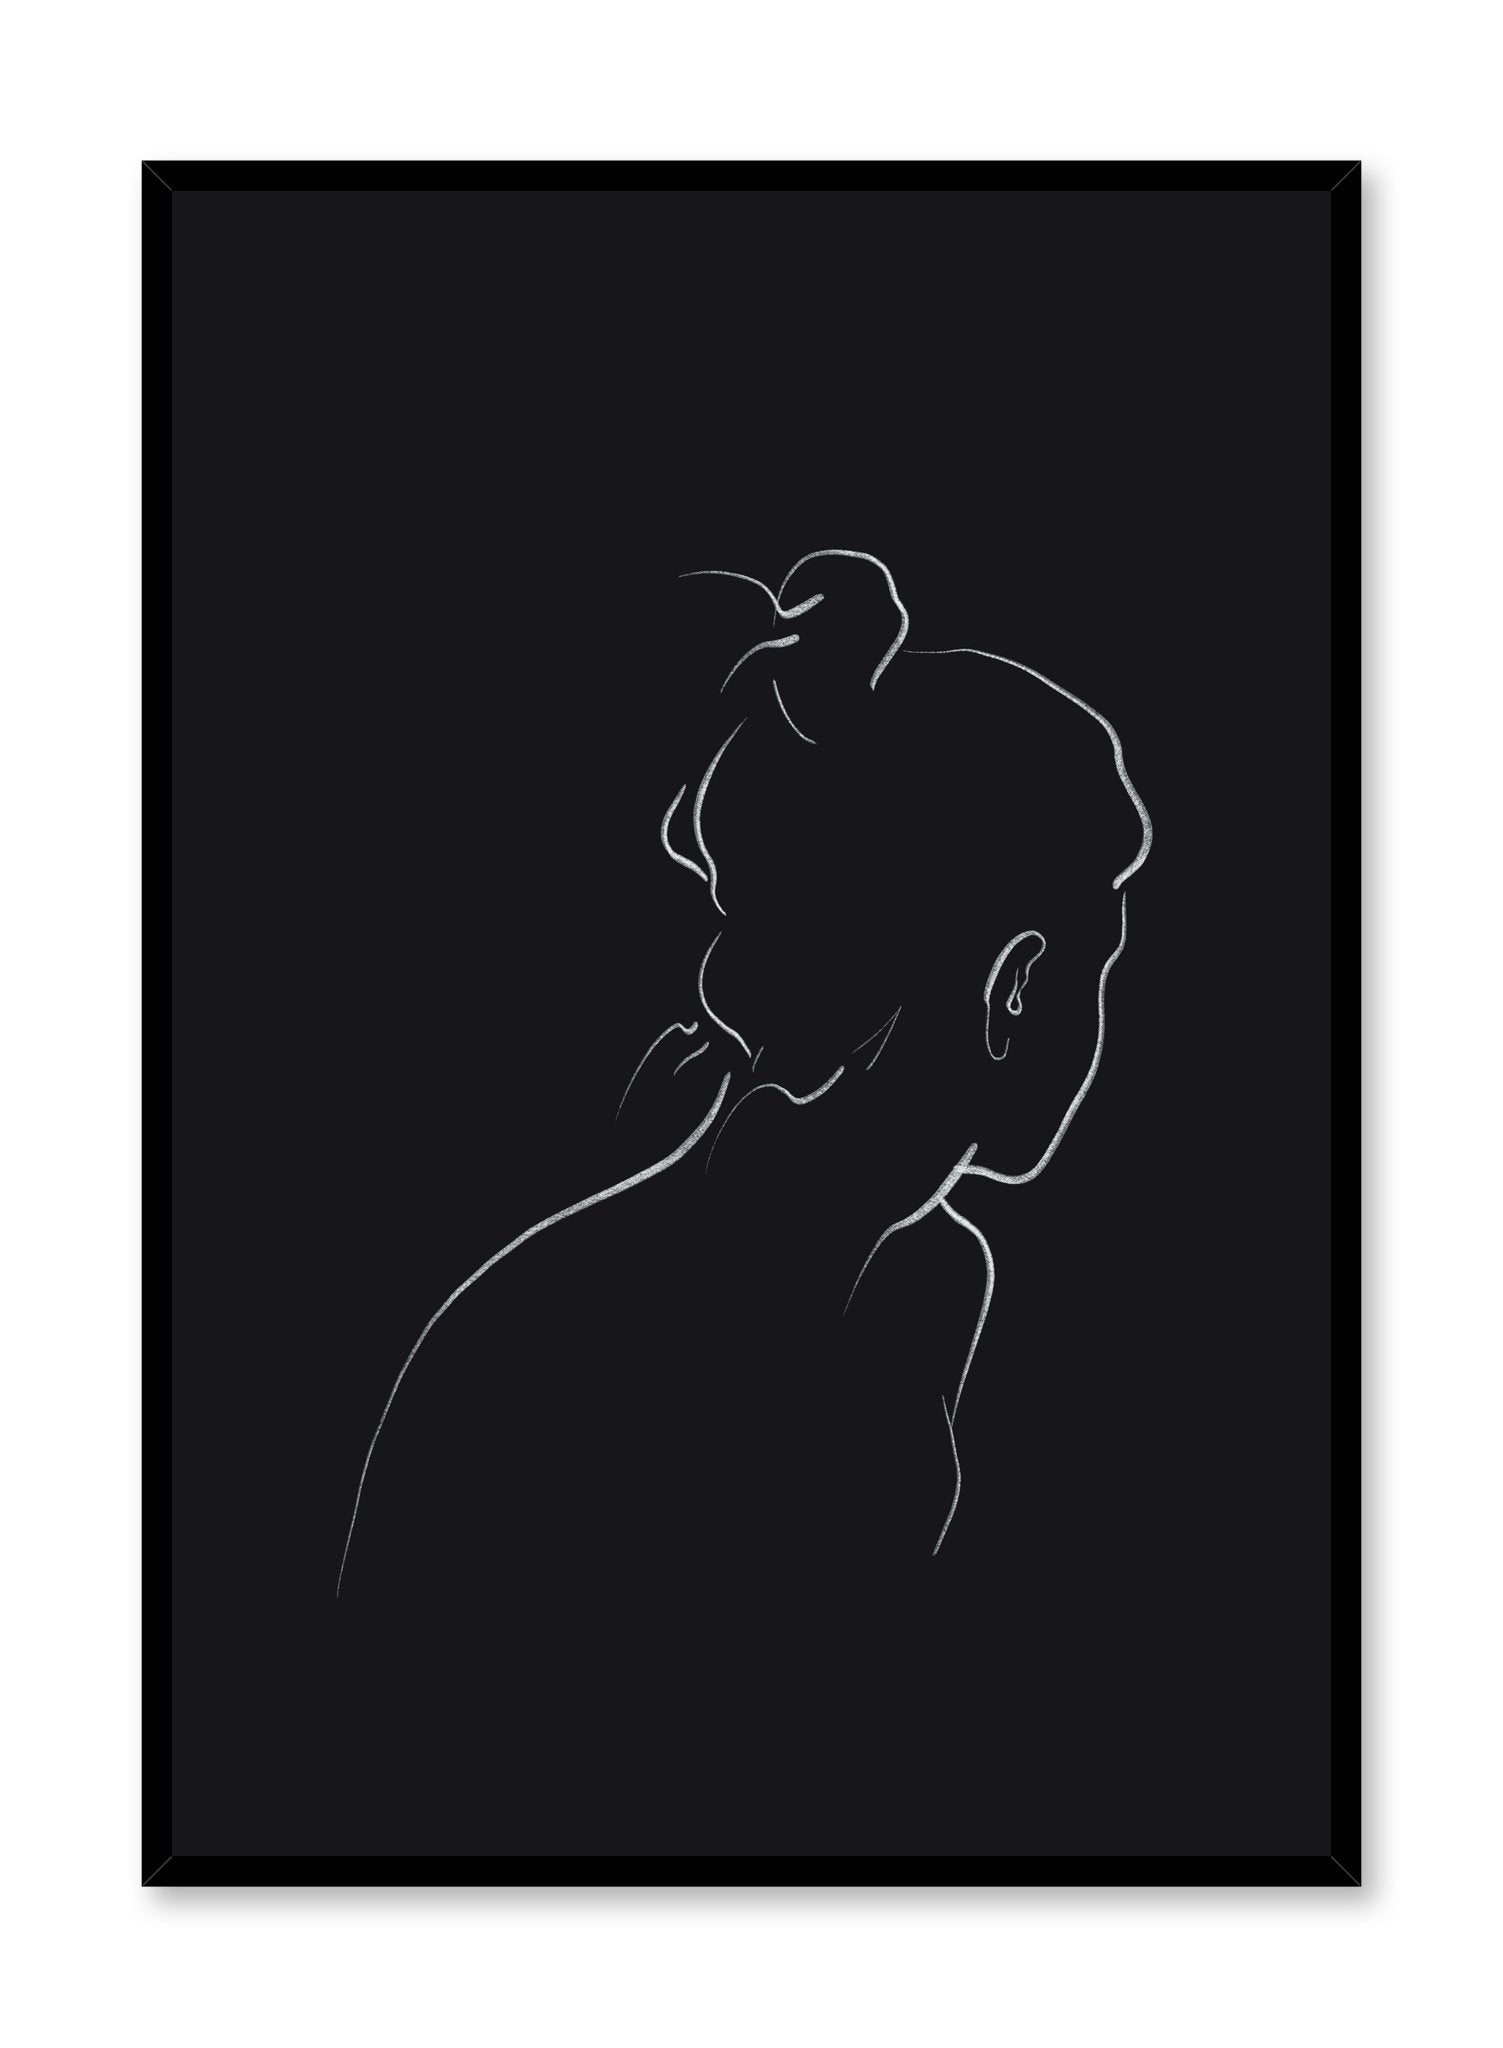 Modern minimalist poster by Opposite Wall with abstract illustration of Into the Distance in black